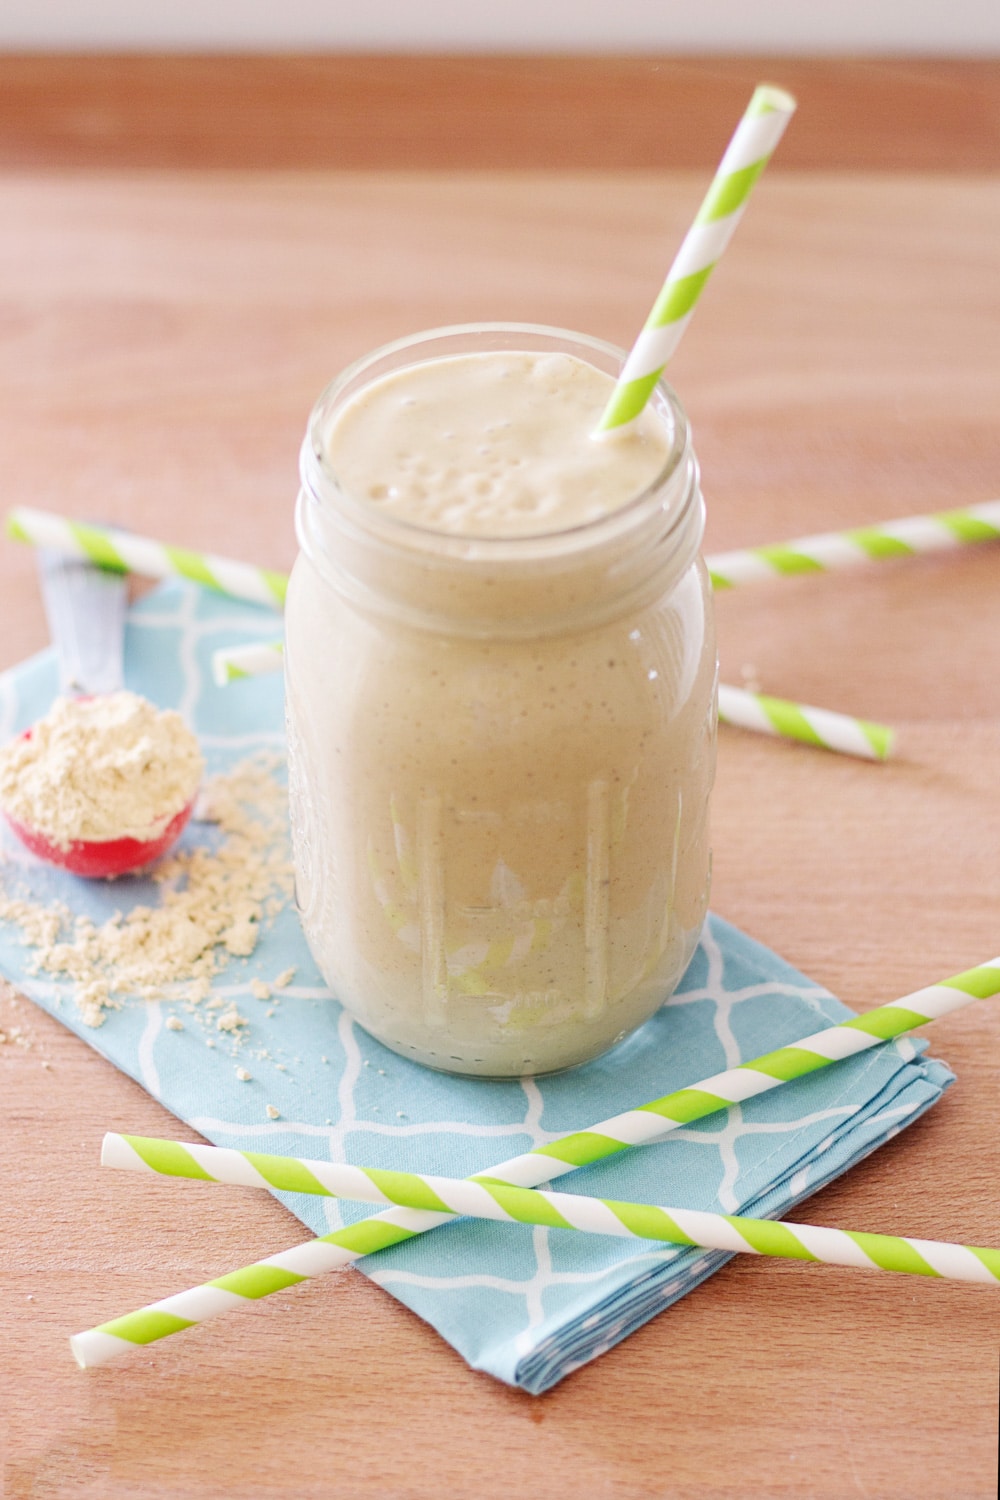 How To Make A Peanut Butter Protein Smoothie? 